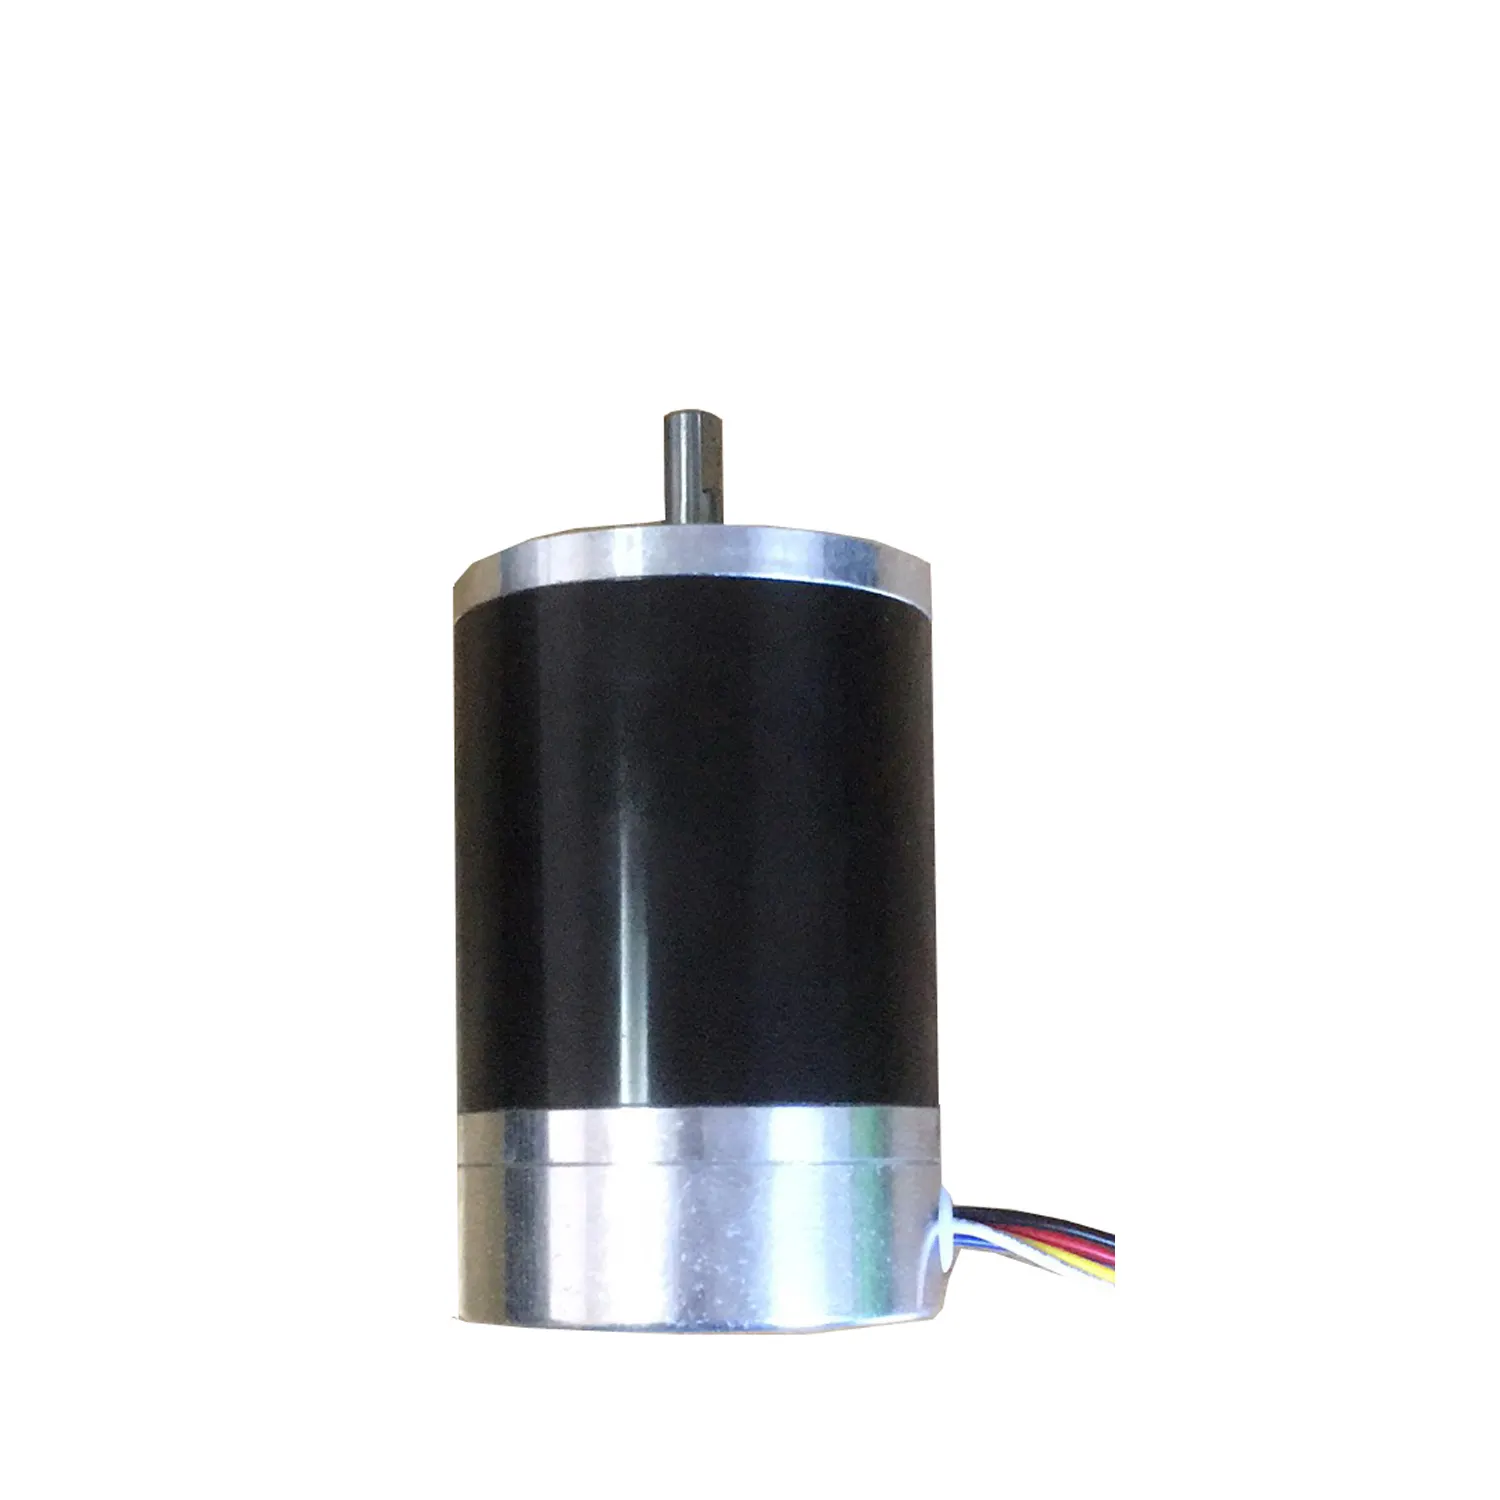 Good quality high torque BLDC Motor customized specification, with size 28mm upto 110mm, power 10w upto 2000w, PWM Control